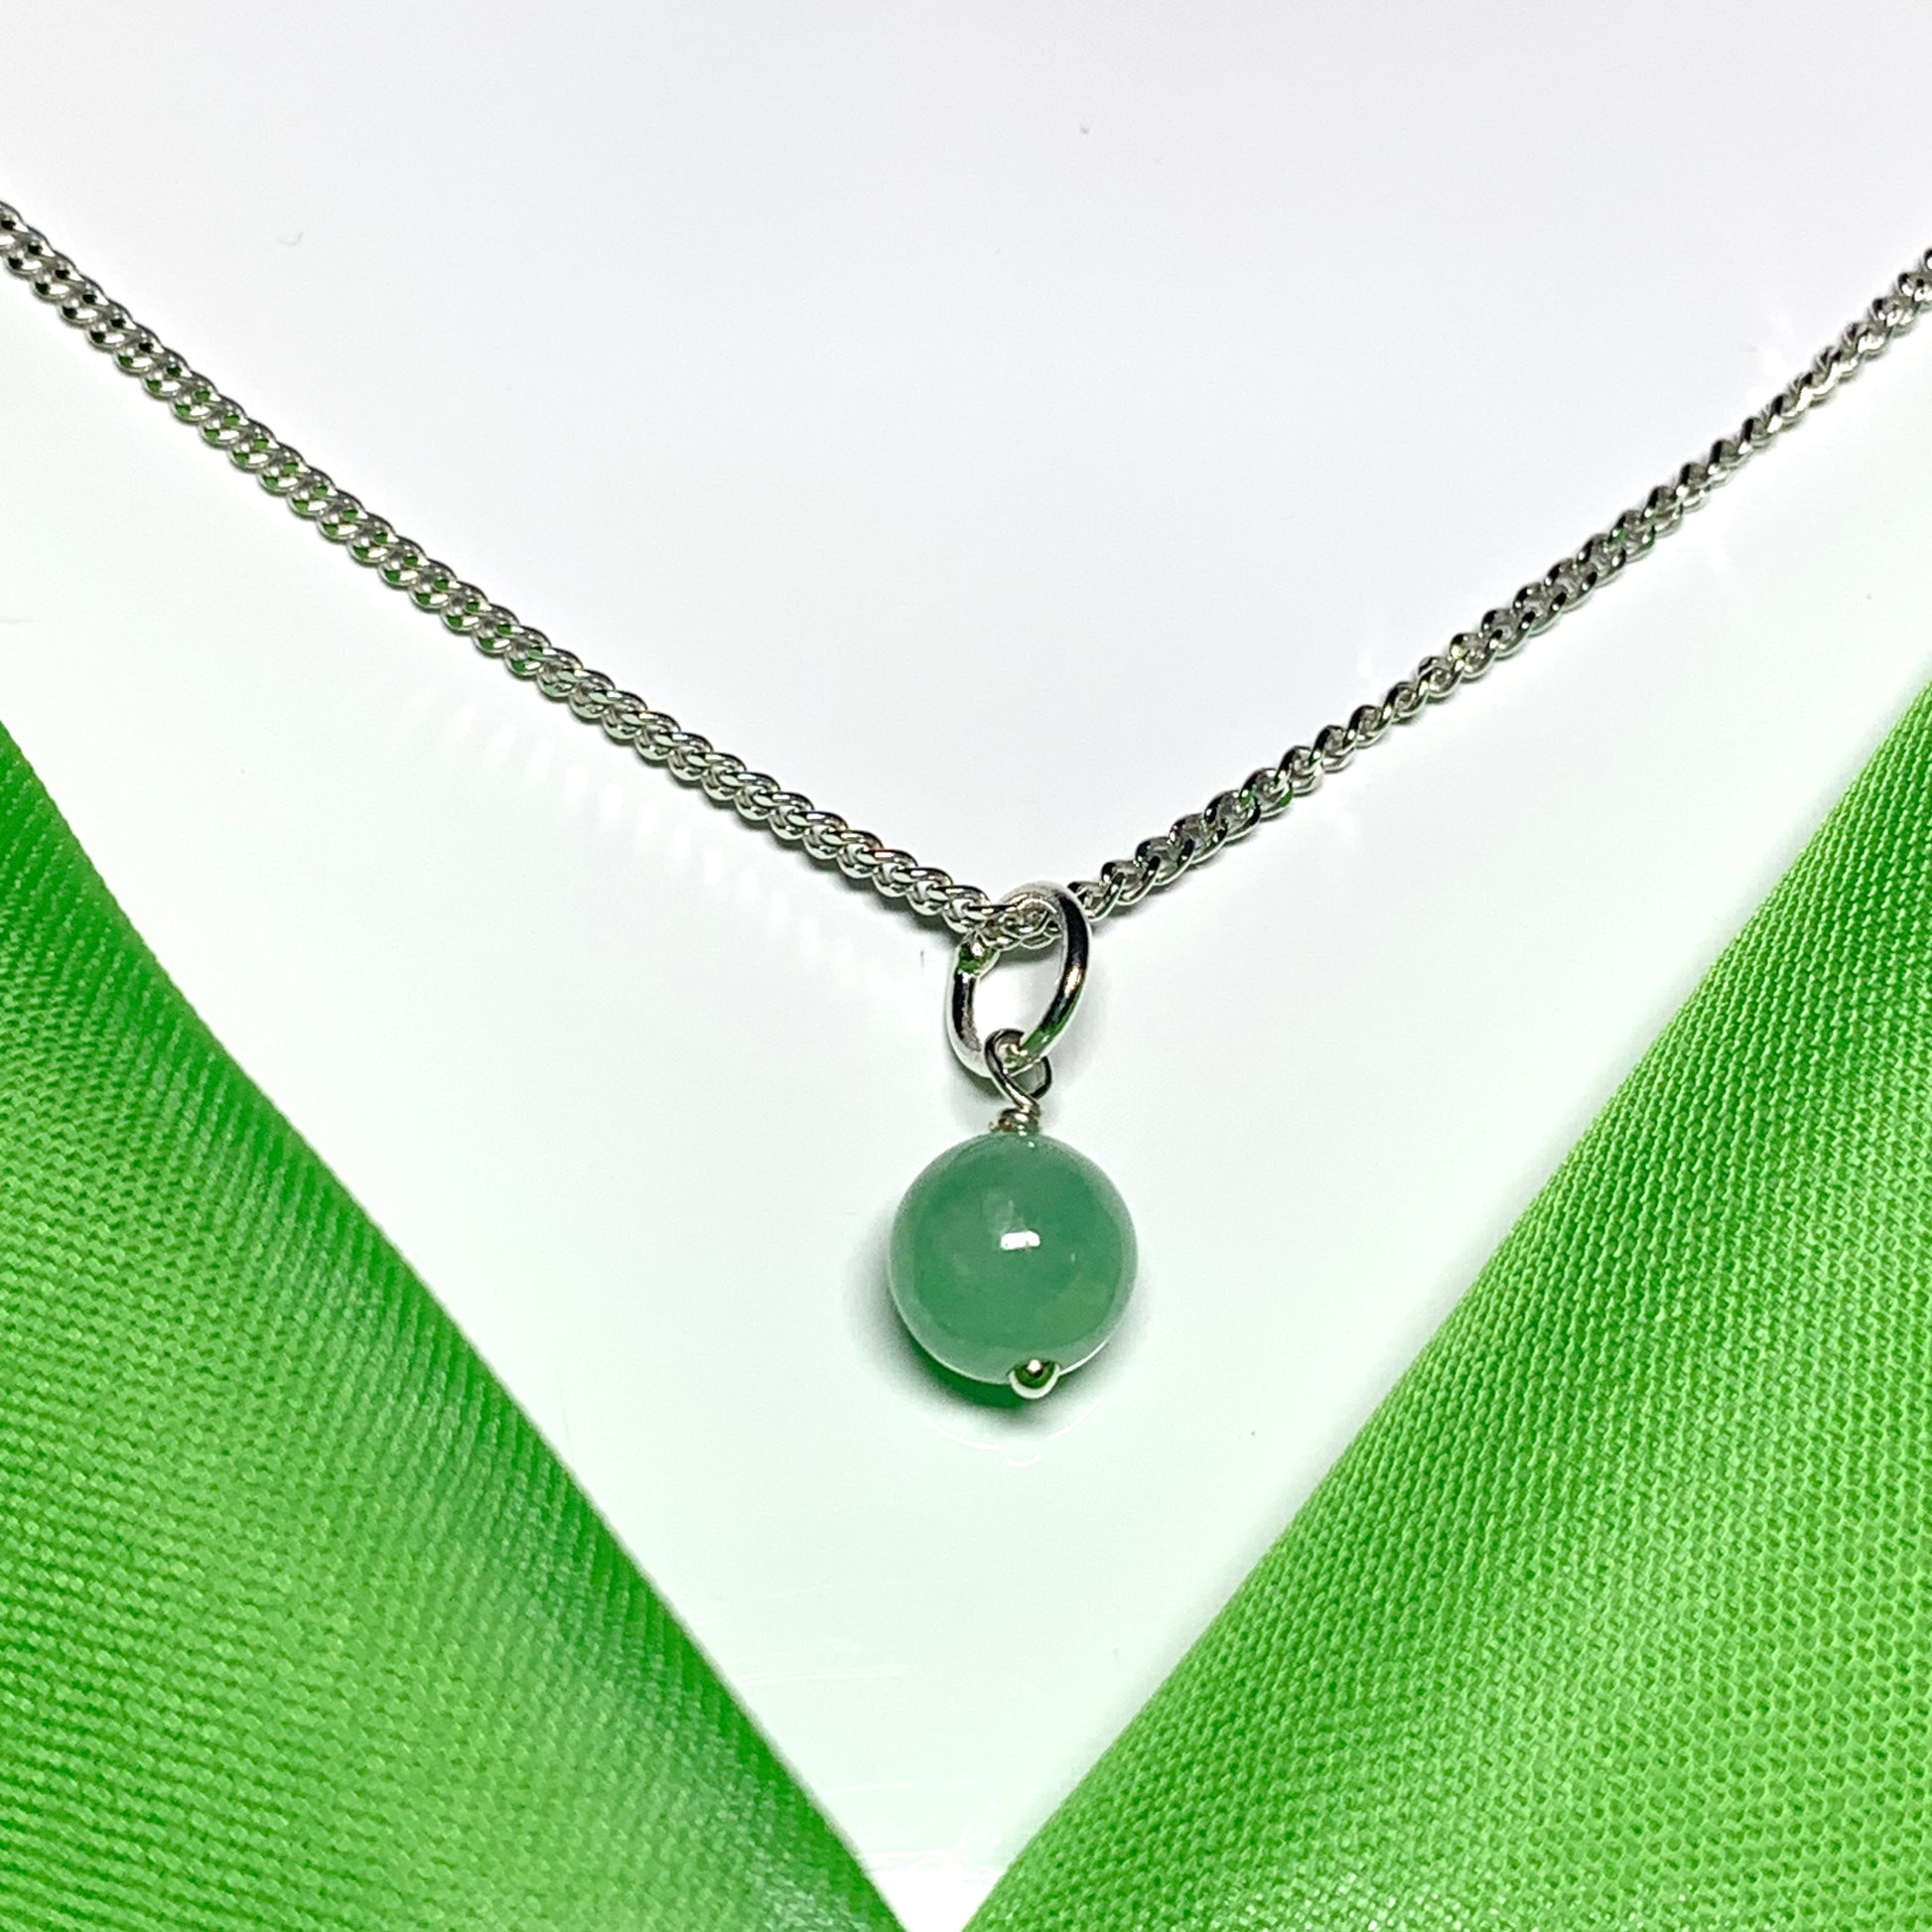 Small real green jade necklace round ball shaped pendant